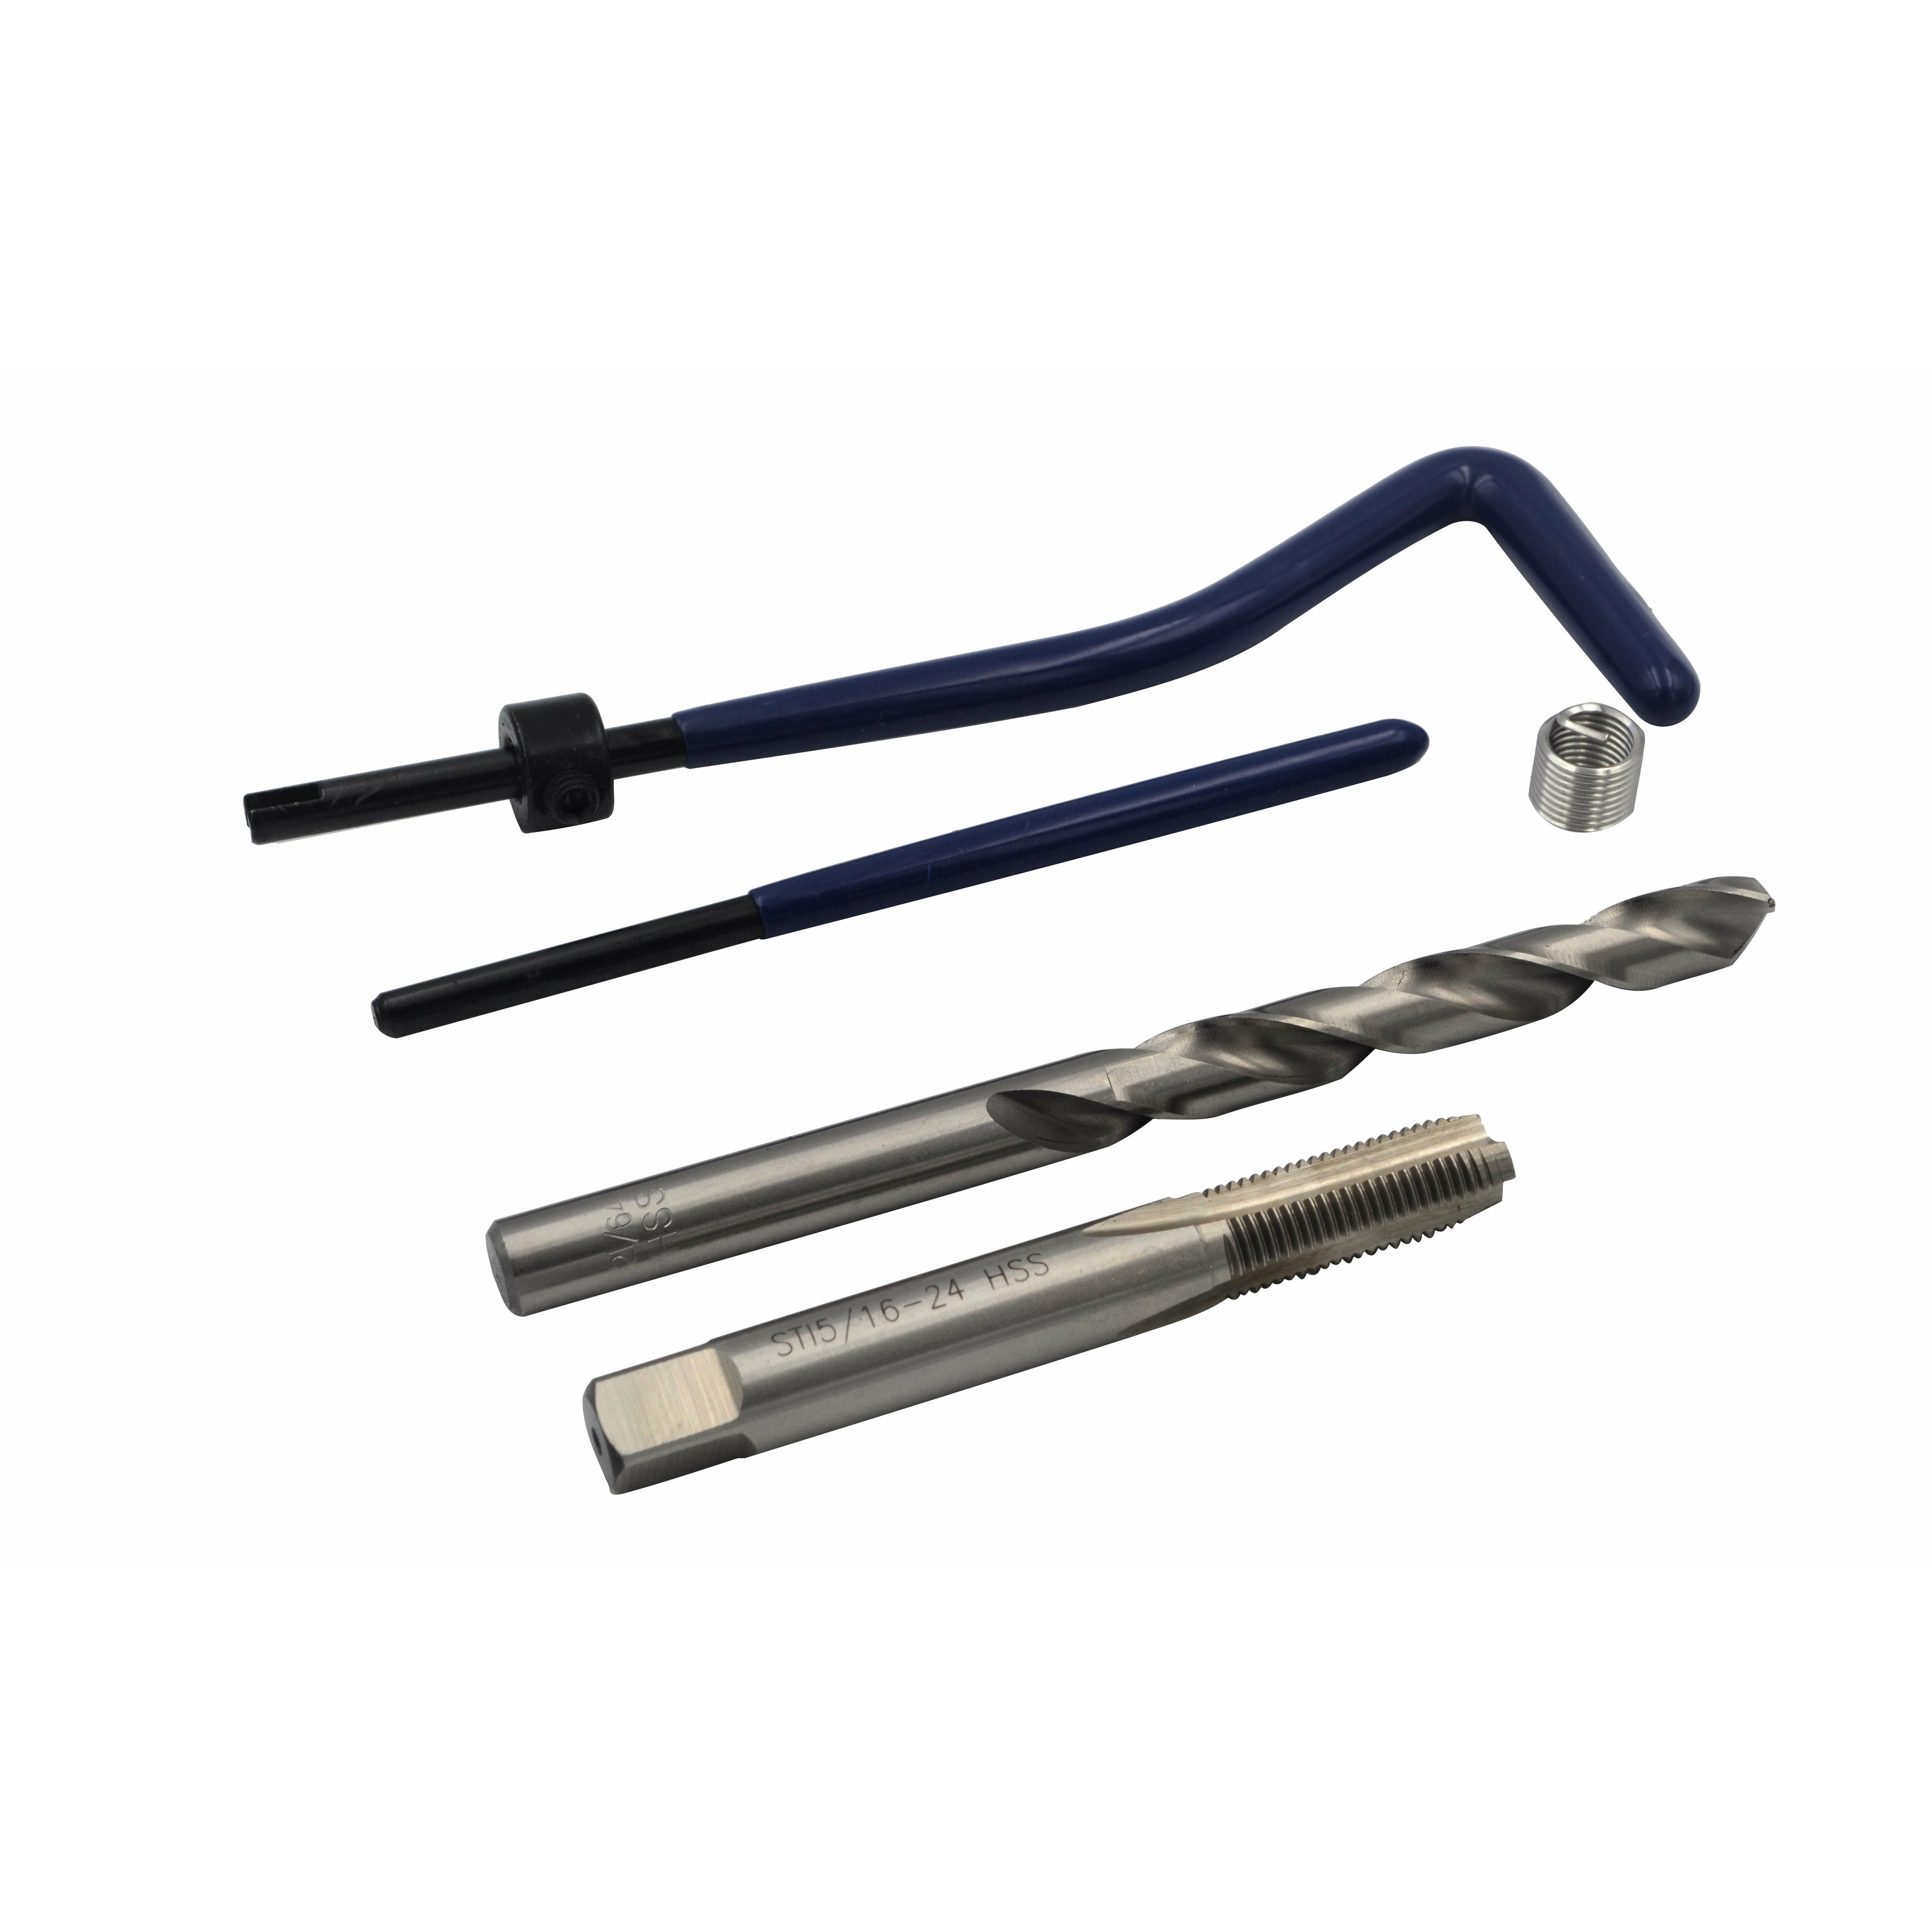 Imperial UNF Helicoil Thread Repair Kit 1/4 up to 1/2